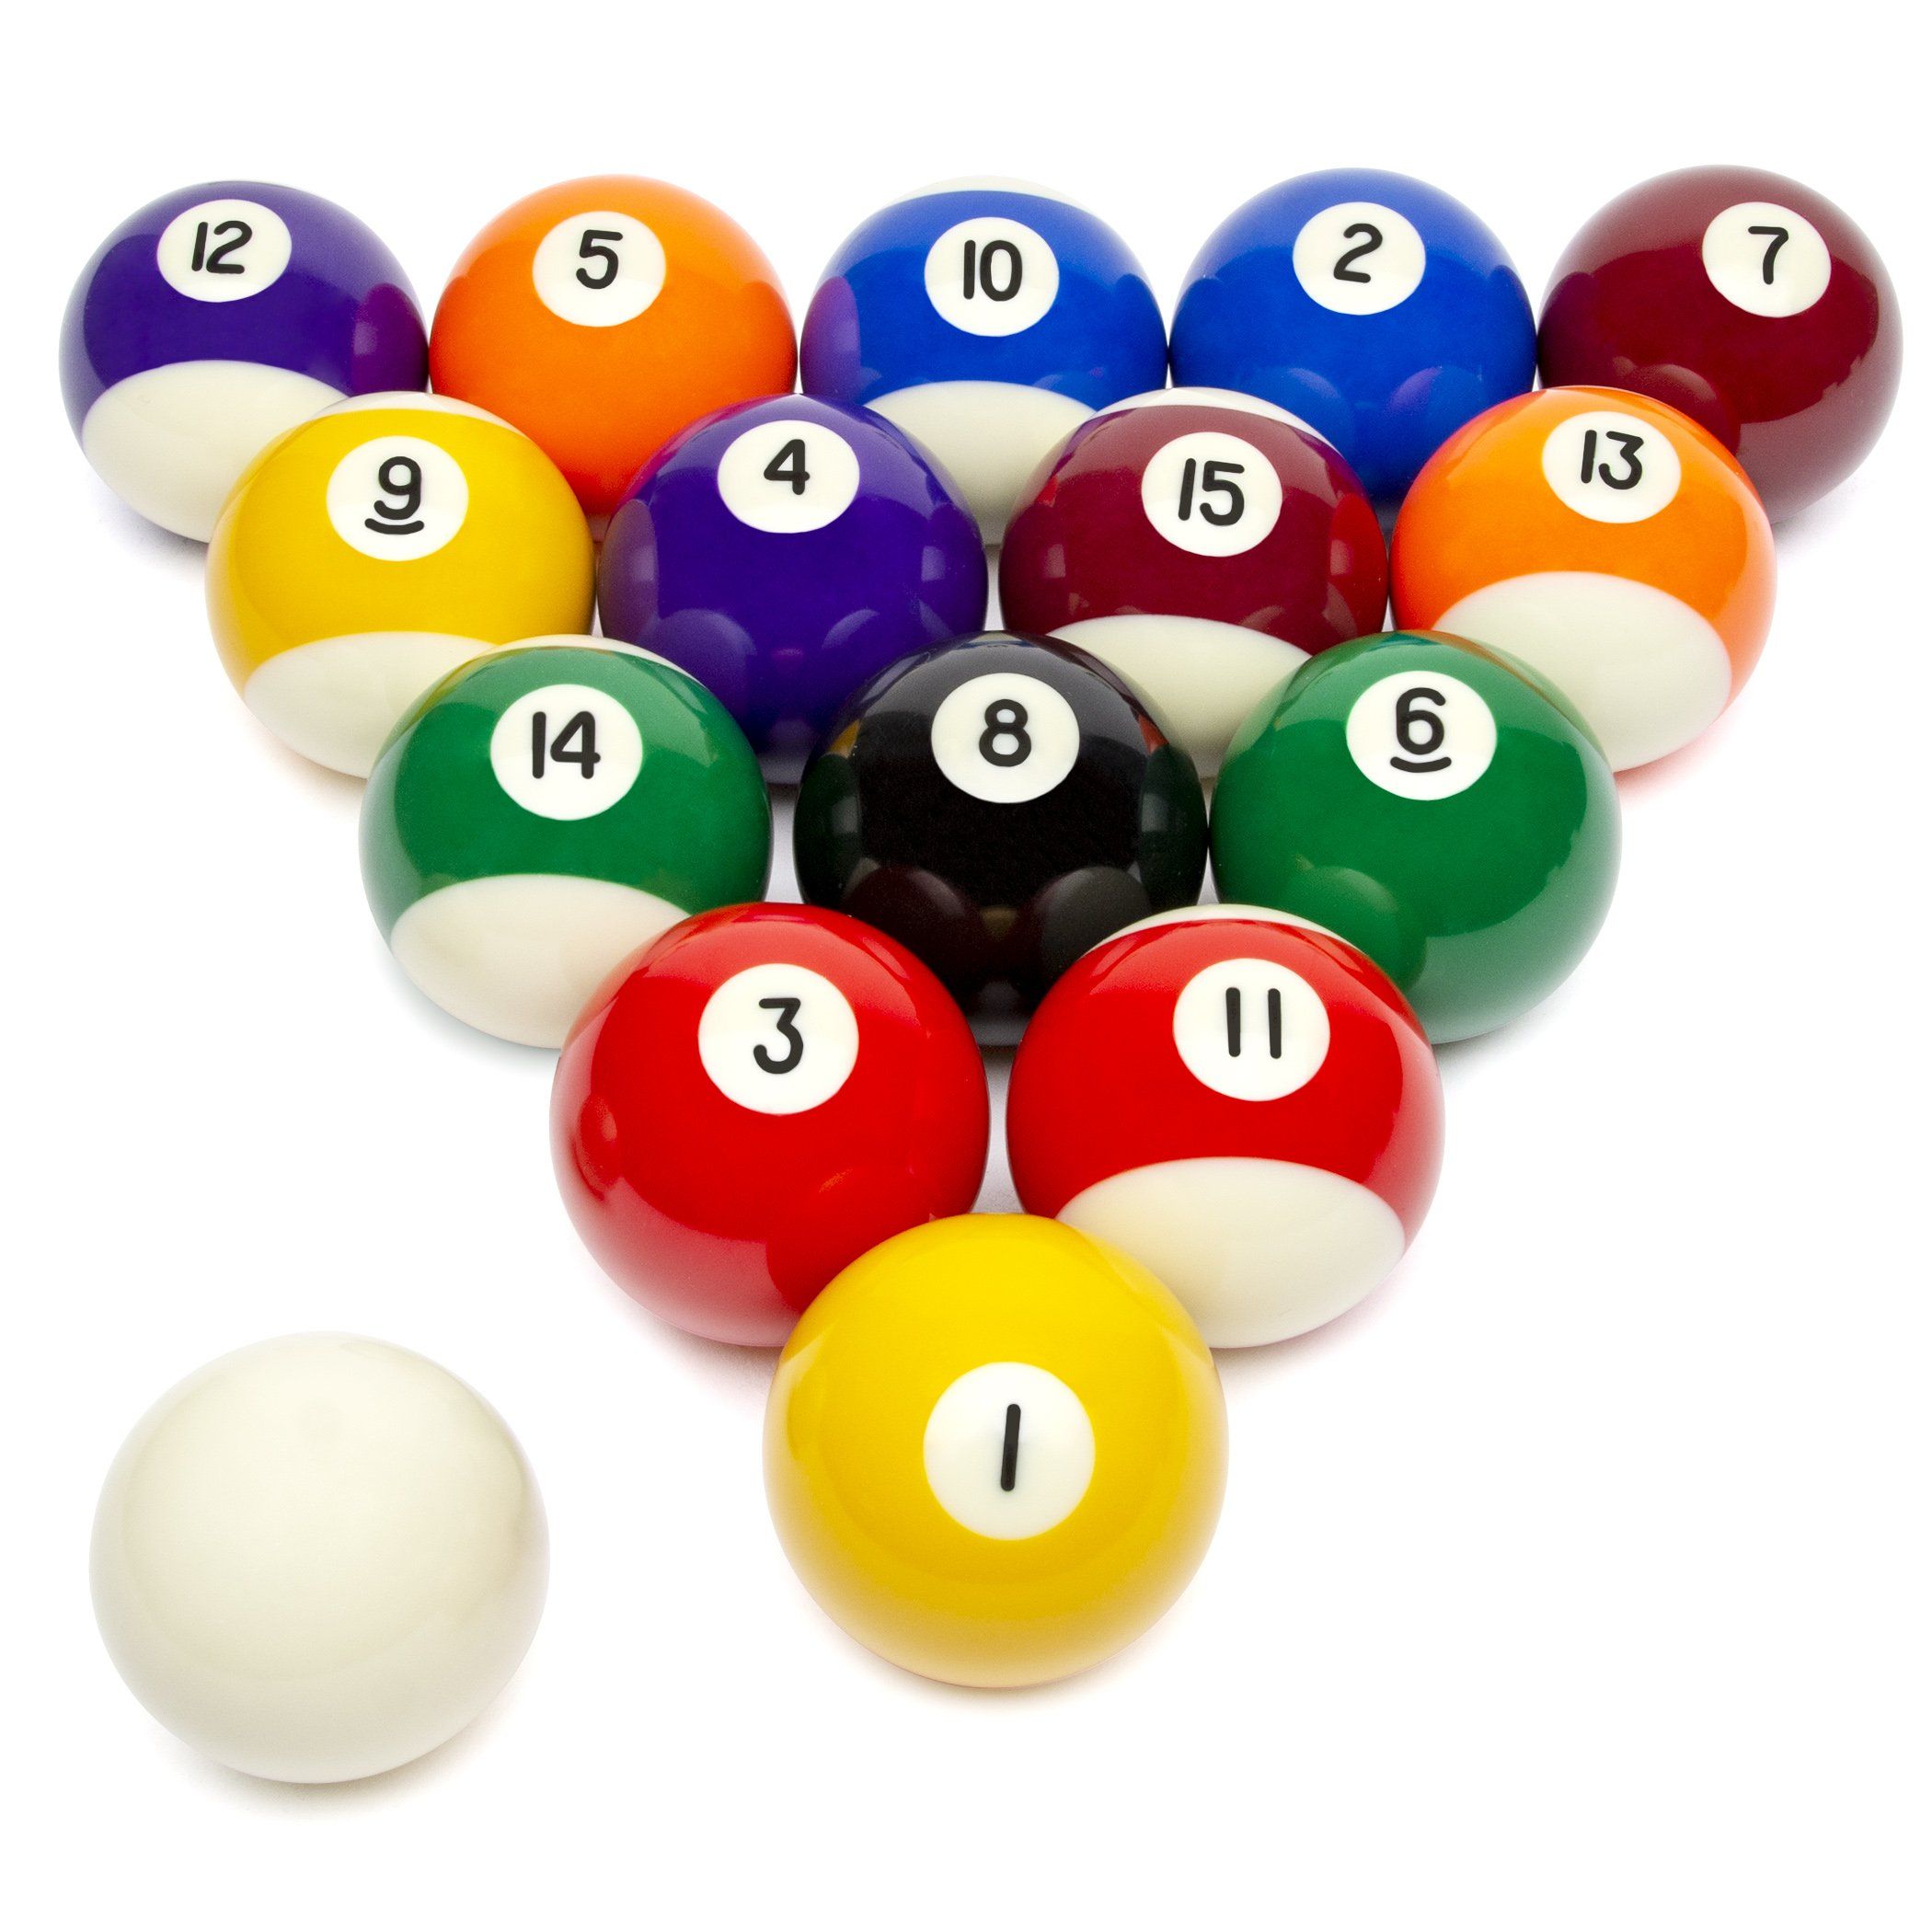  Mototo Billiard #8 Ball Regulation Size 2-1/4 Practice  Training Pool Table Billiard Replacement for Games & Sports : Sports &  Outdoors